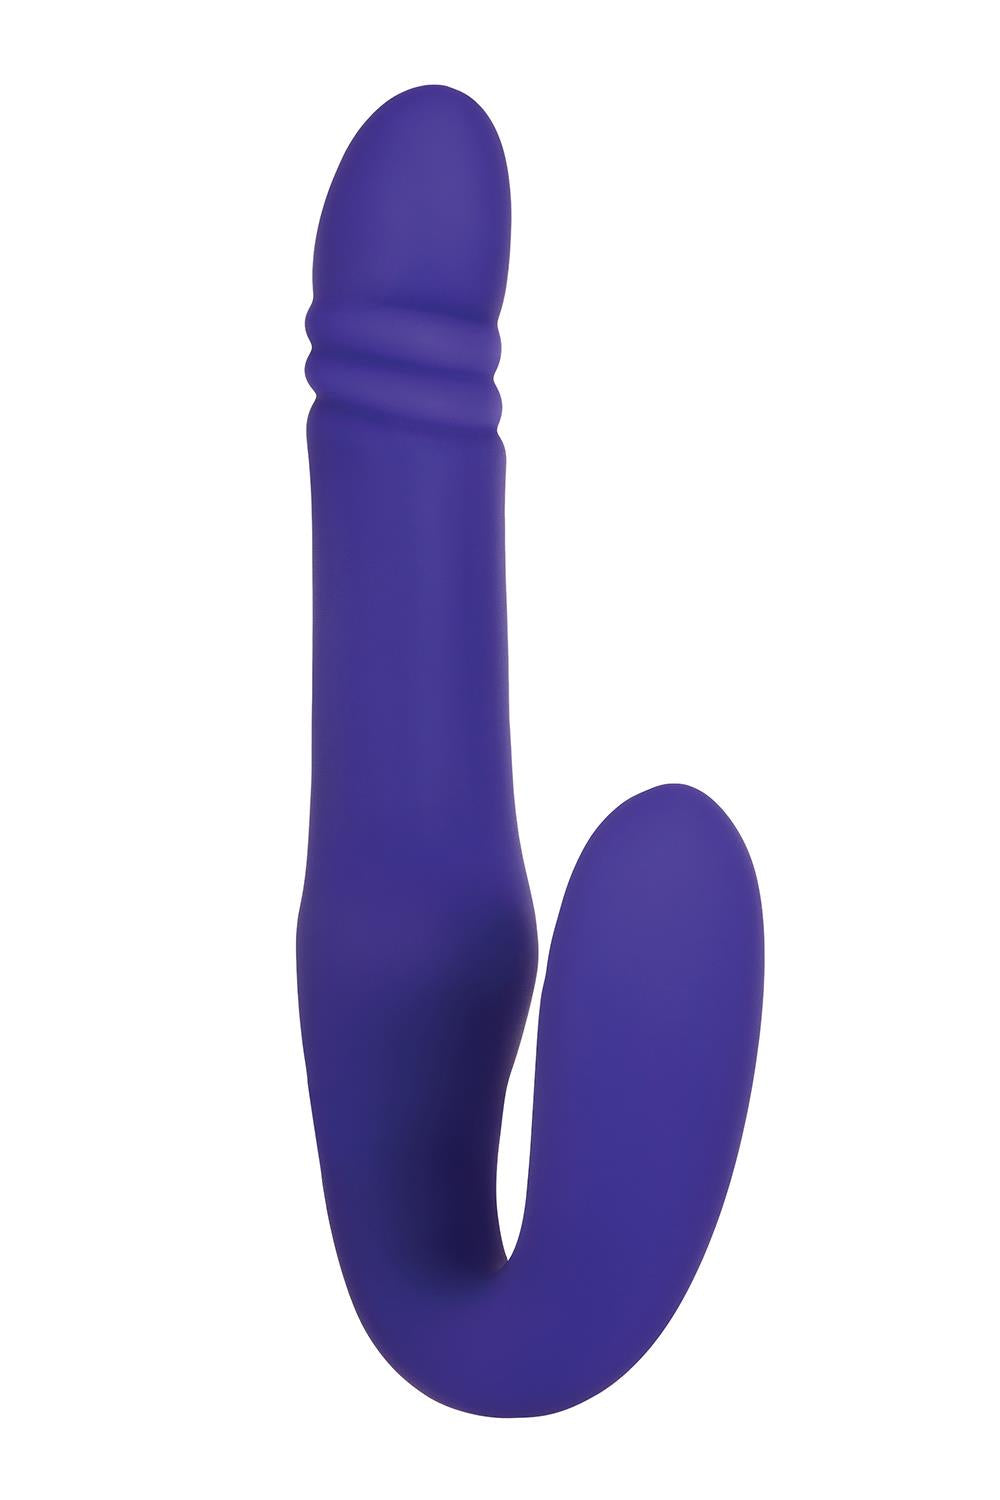 A&e Eves Ultimate Thrusting Strapless Strap On